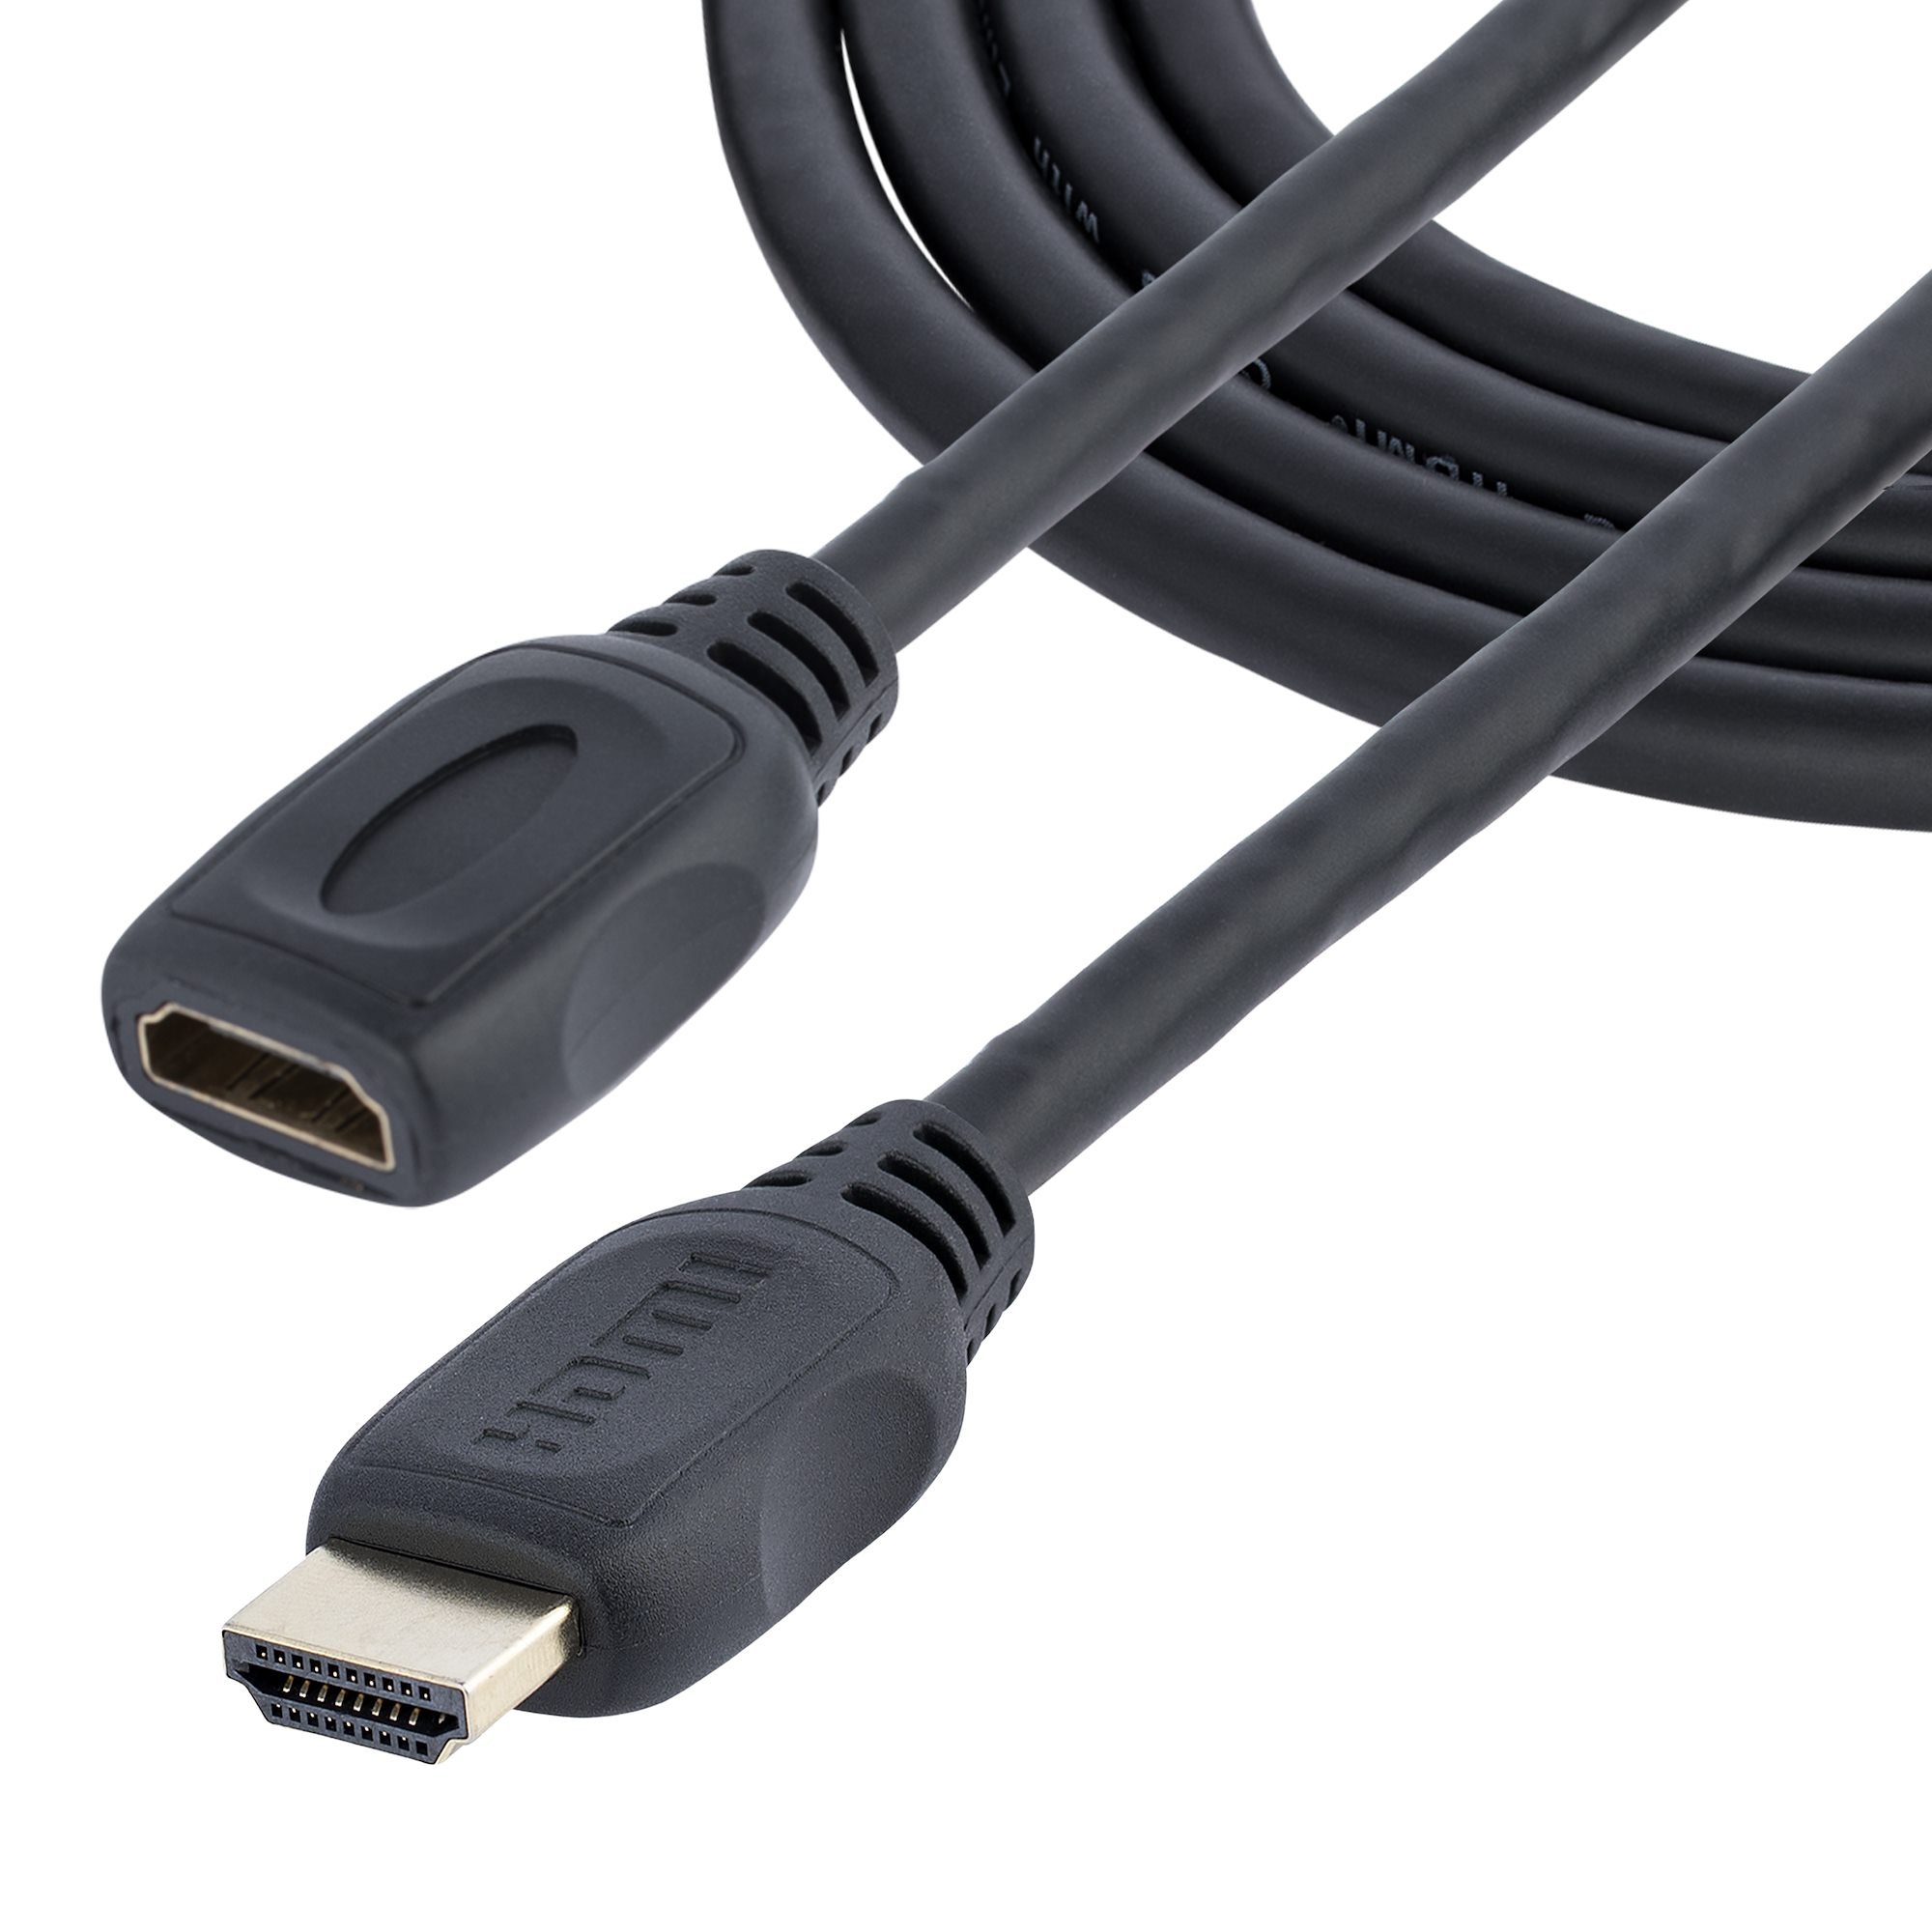 【HDEXT2M】2M HDMI EXTENSION CABLE - ULTRA